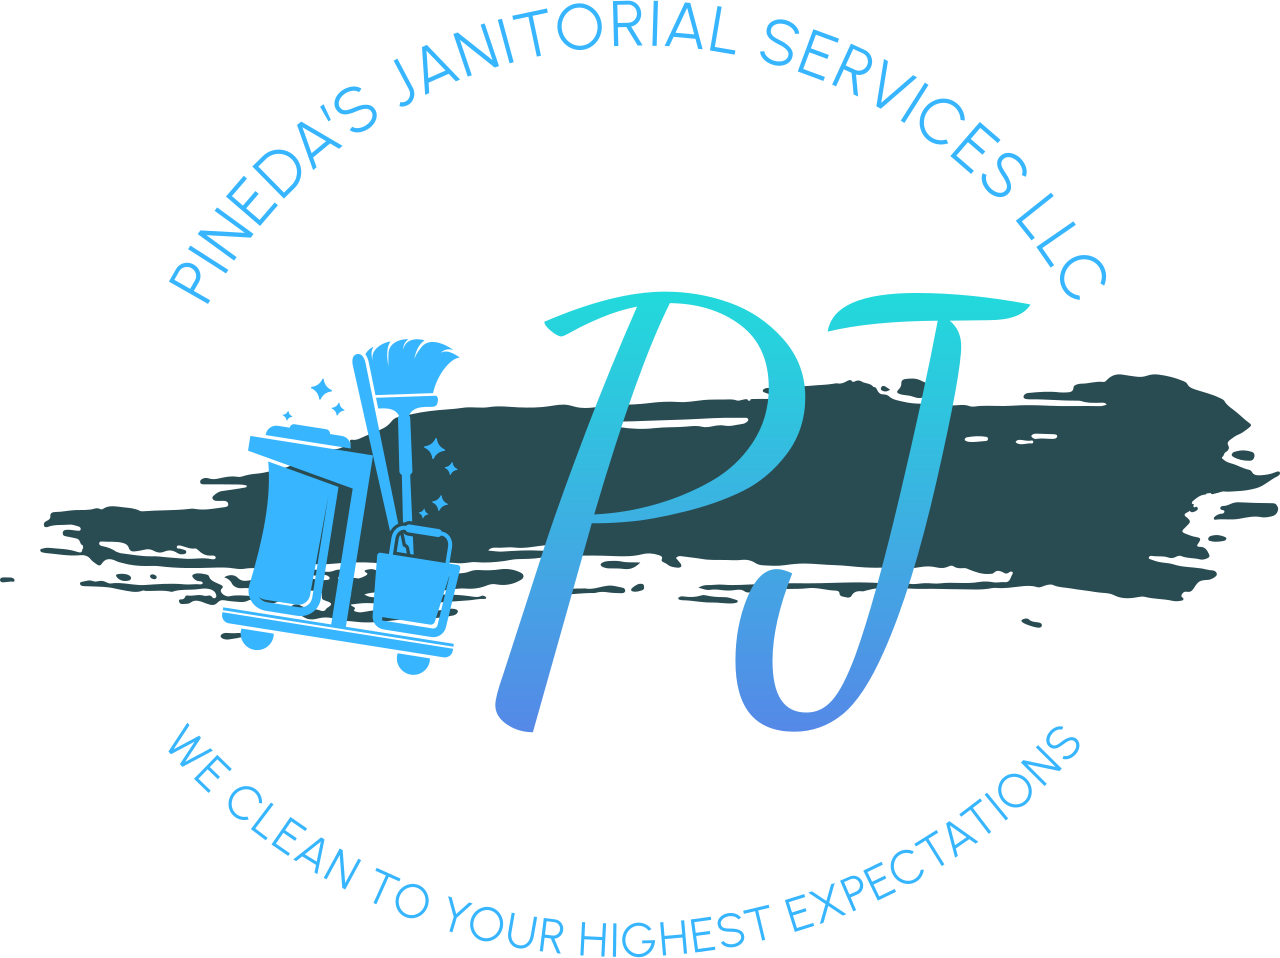 PINEDA’S JANITORIAL SERVICES LLC's web page